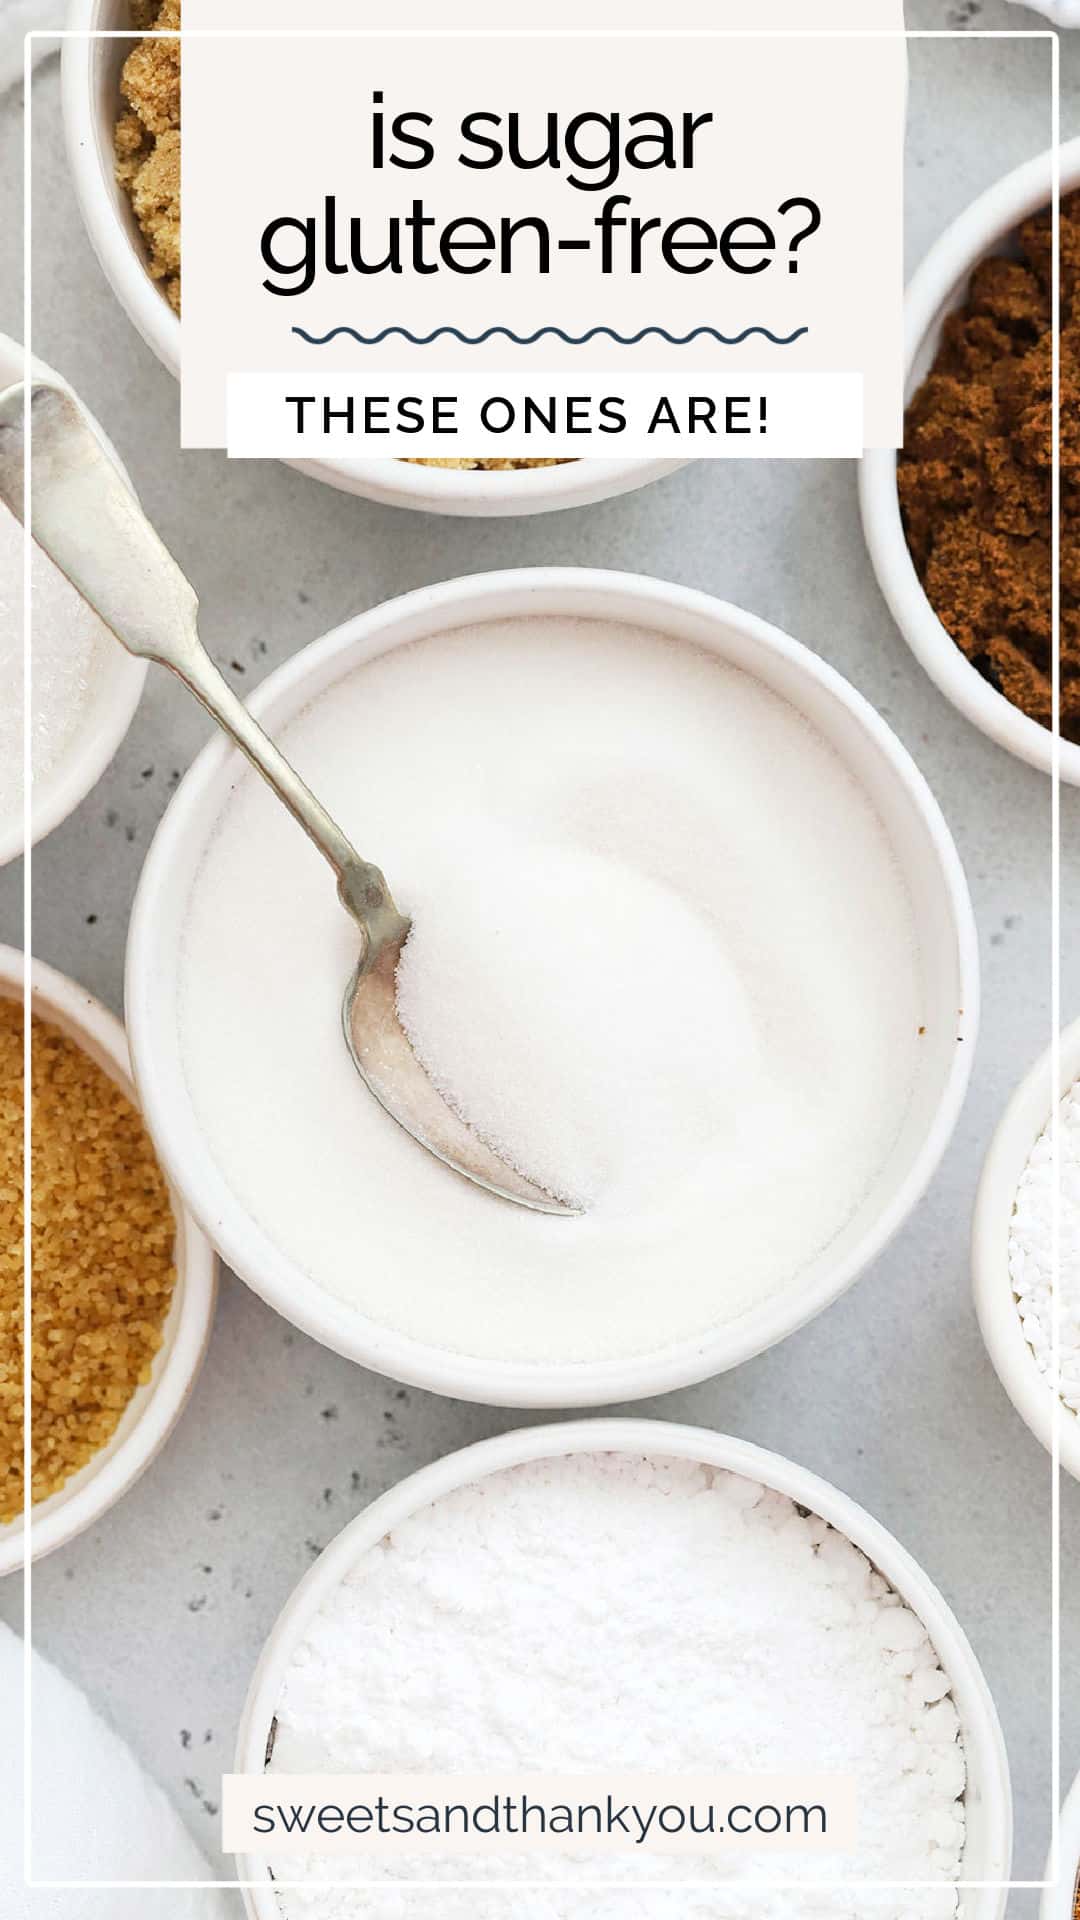 Ever wondered if sugar is gluten-free? We're breaking it all down, from types of sugar, to which brands are gluten-free and more! / brands of gluten free sugar / gluten free brands of sugar / is brown sugar gluten free / is powdered sugar gluten free / are sugar cubes gluten free / what kinds of sugar are gluten free / is all sugar gluten free / where to buy gluten free sugar